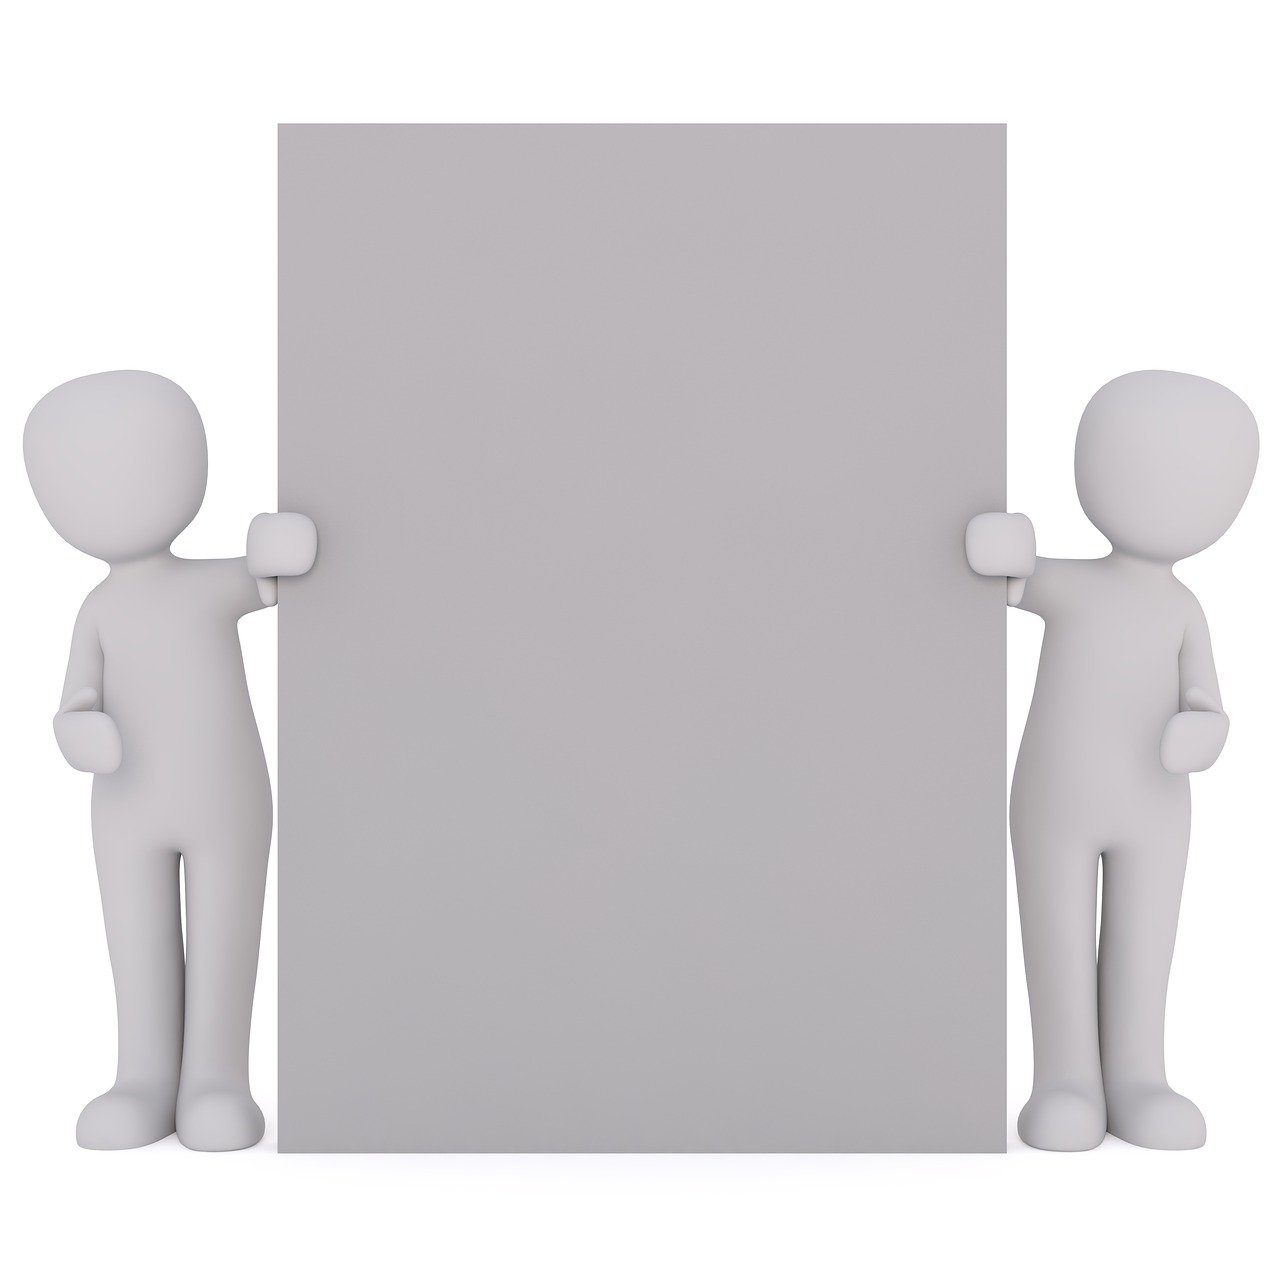 a couple of people that are standing next to a sign, conceptual art, all white render, card template, gray anthropomorphic, half body photo